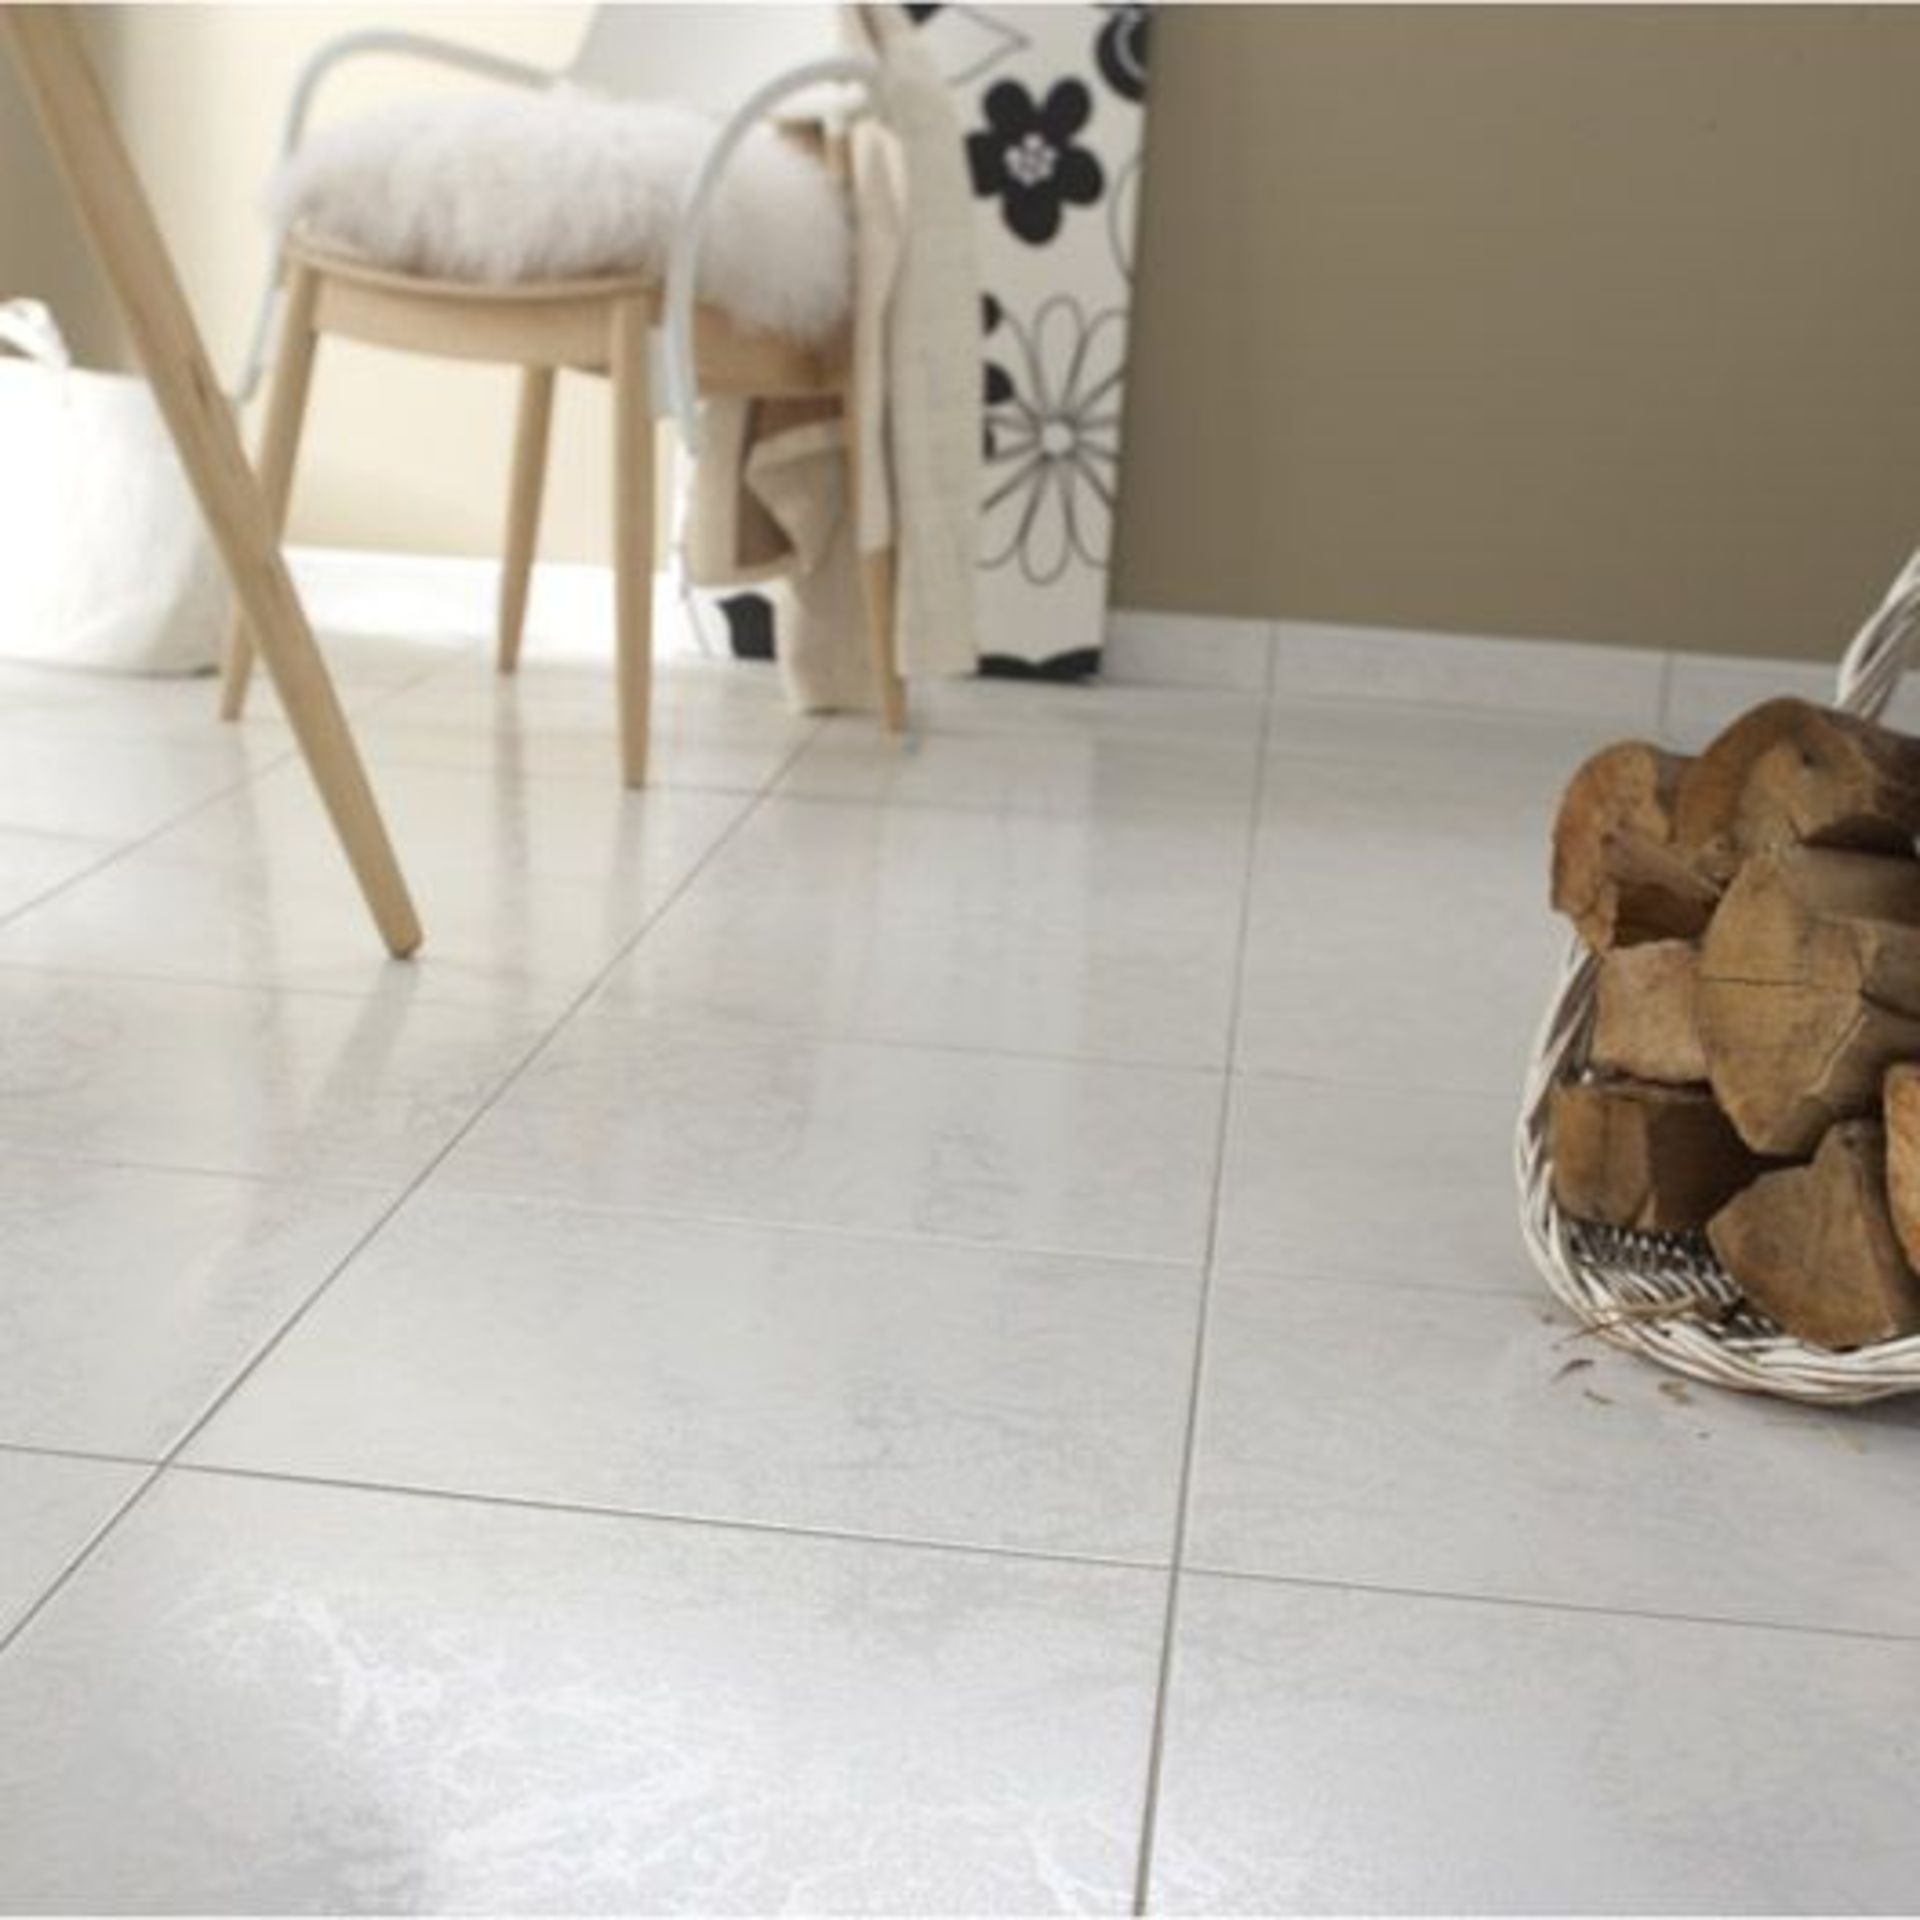 NEW 9.72m2 Ubeda Blanco Floor and Wall Tiles. 450x450mm per tile, 1.62m2 per pack. 8.7mm thick....